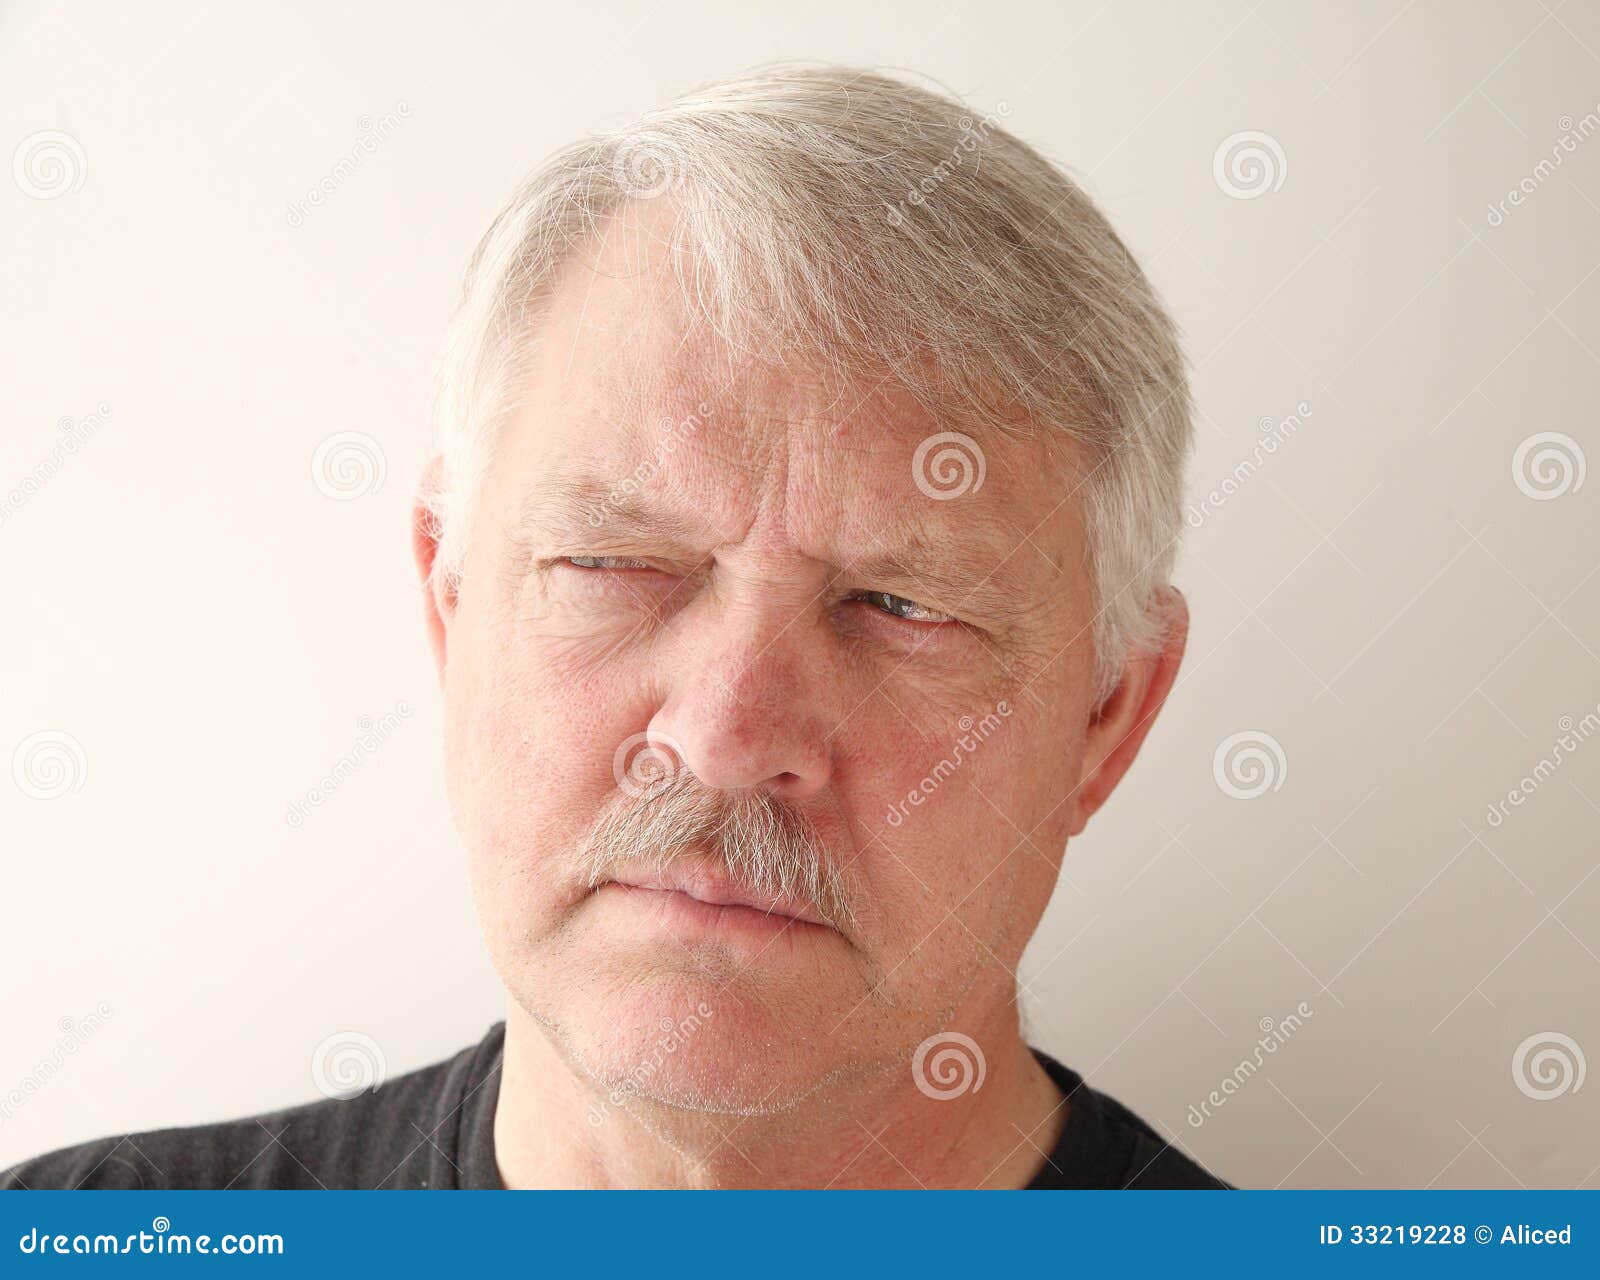 Older Man Has a Distrusting Look Stock Photo - Image of negative ...